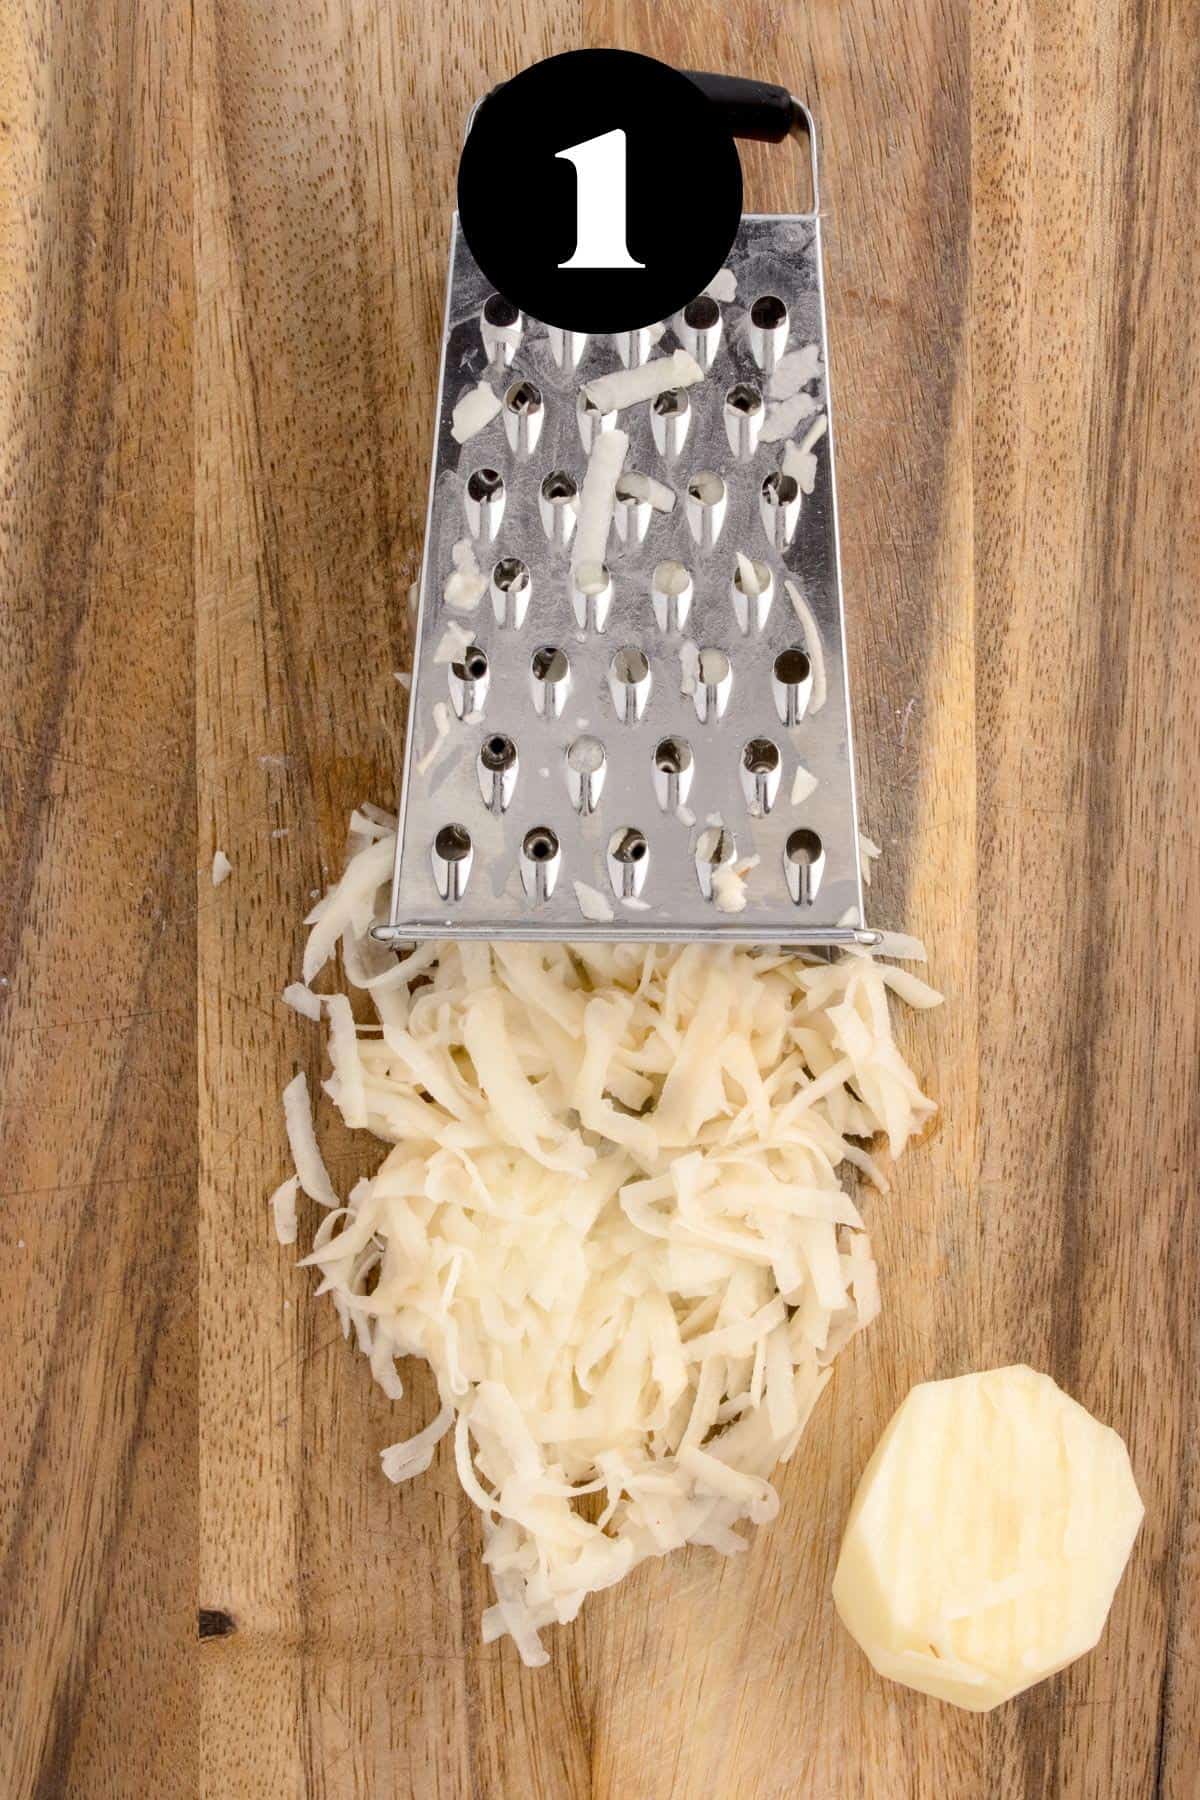 A box grater and some shredded potatoes on a cutting board.